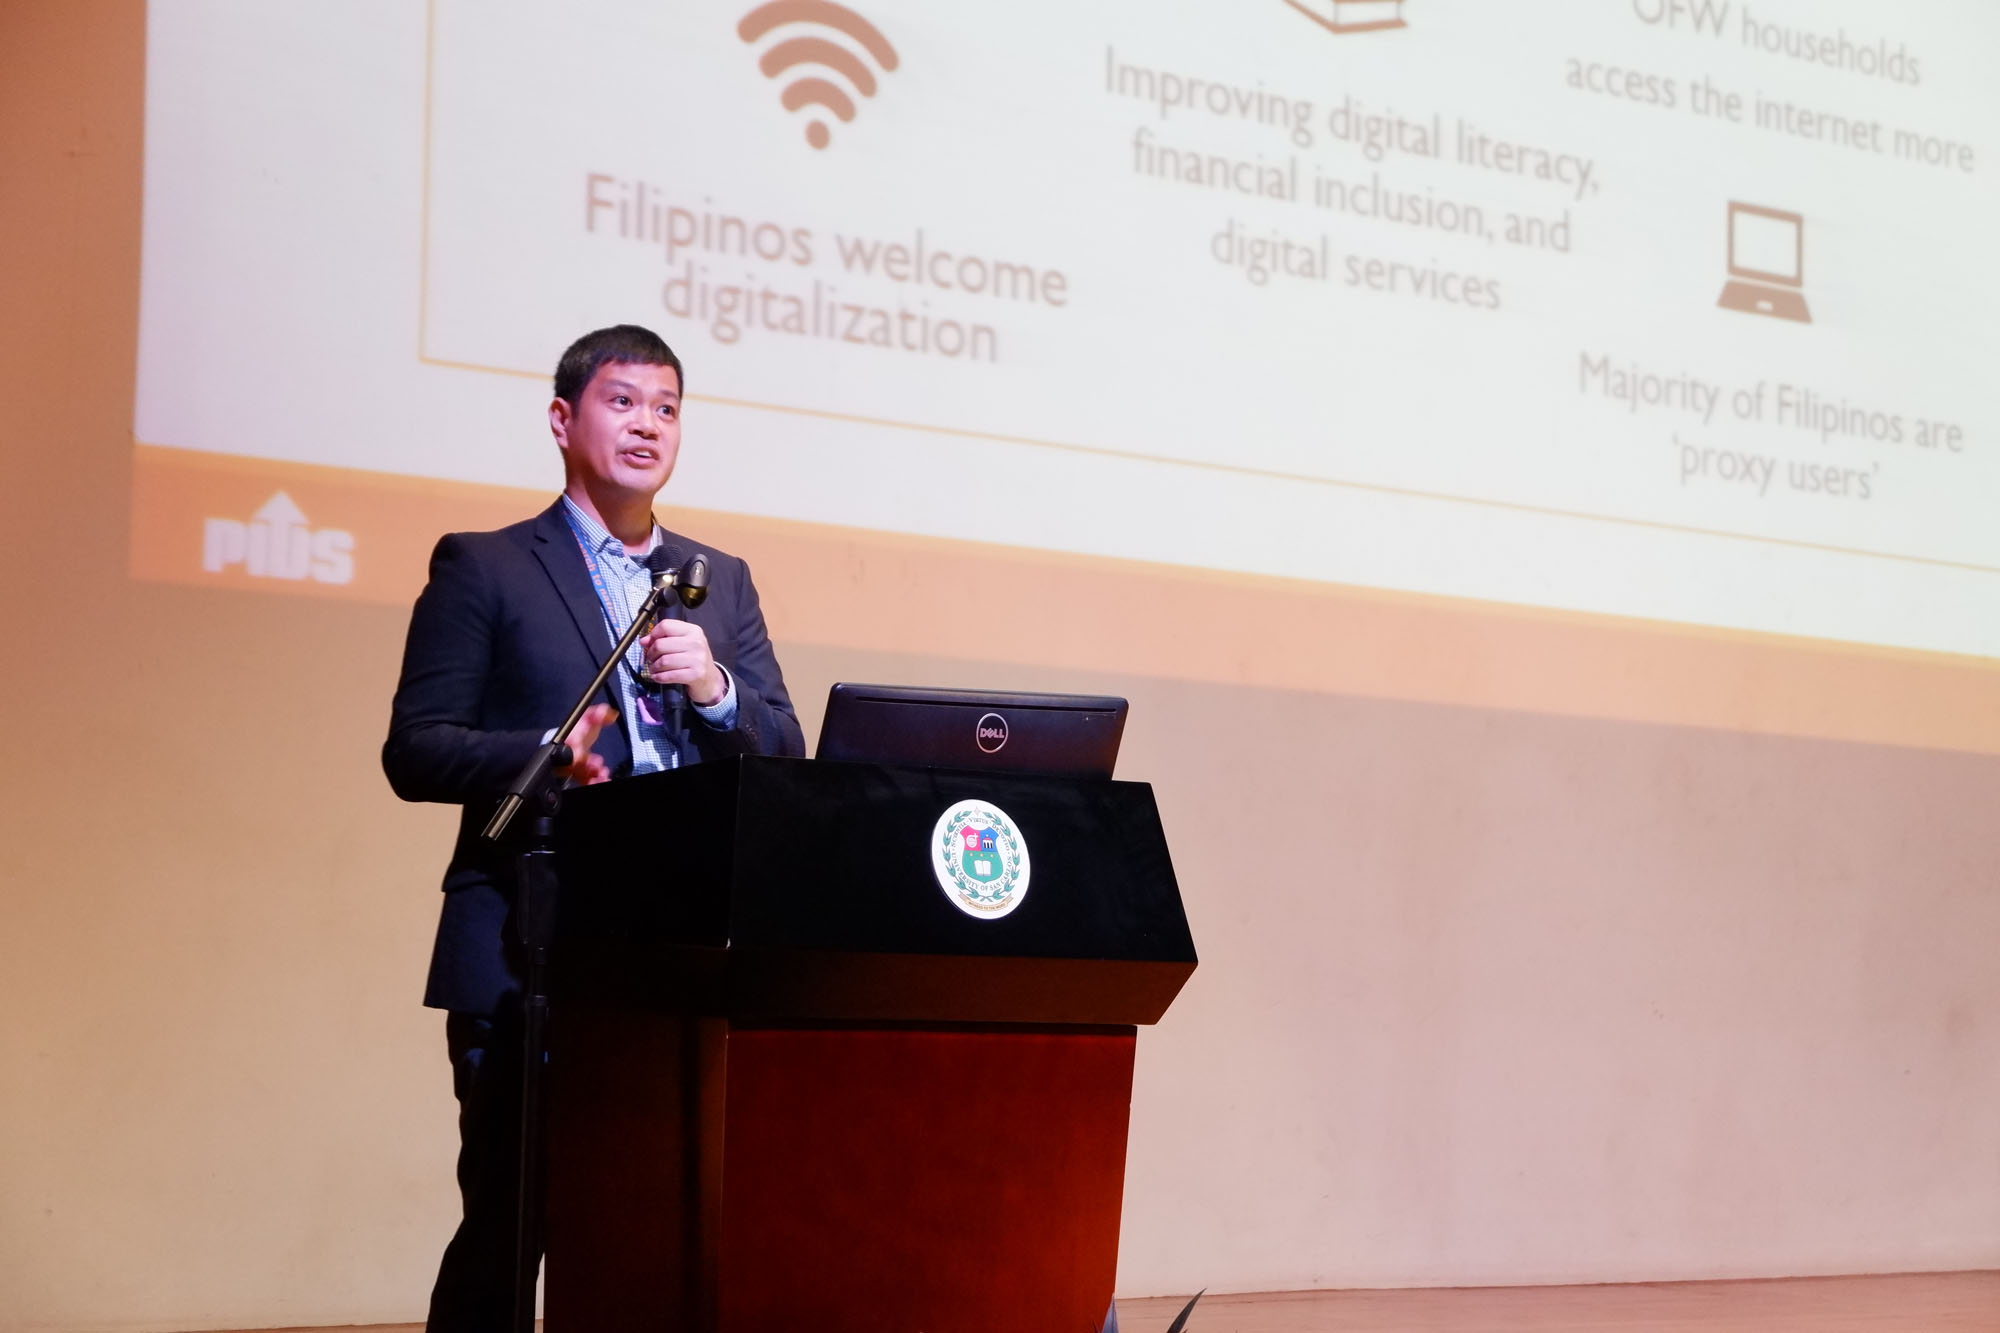 PASCN Regional Symposium on Disruptive Technologies: Opportunities, Challenges, and Risks-pascn-usc-19-20190123.jpg